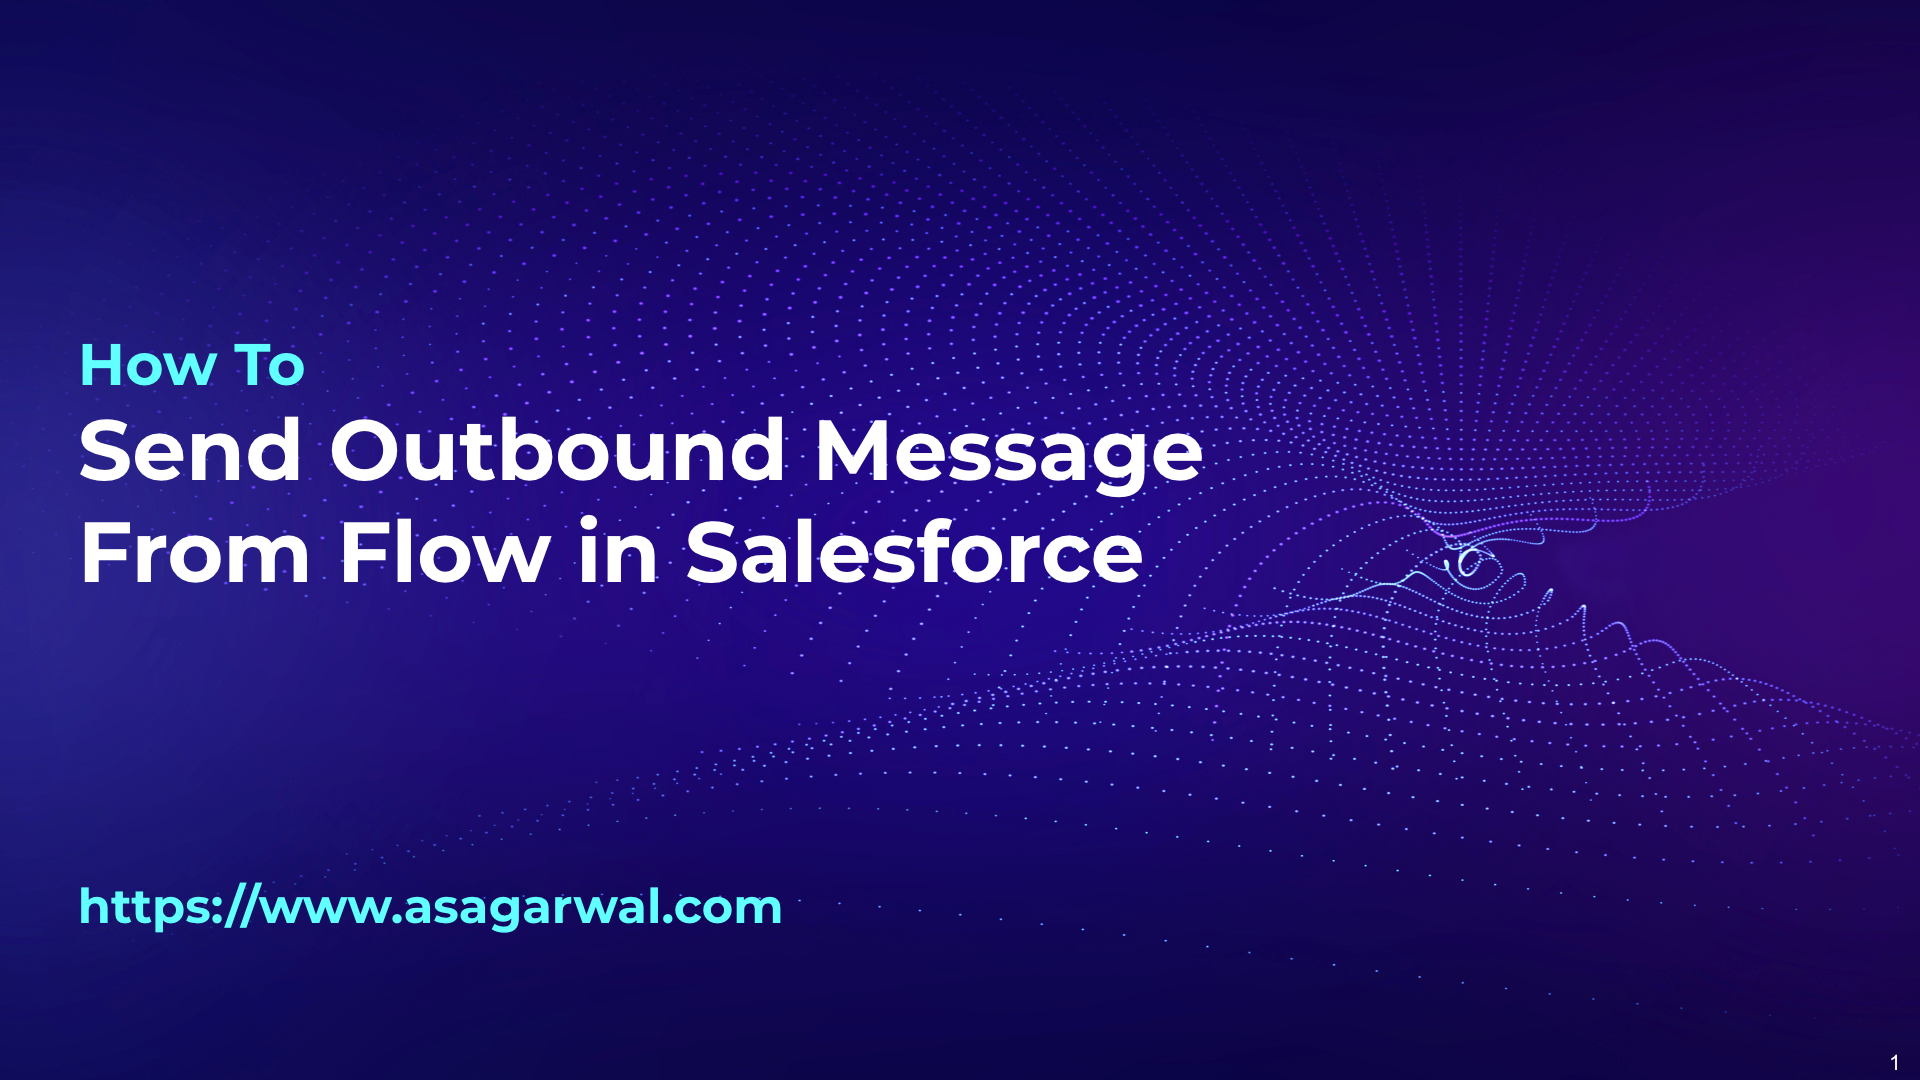 How To Send Outbound Message From Flow in Salesforce